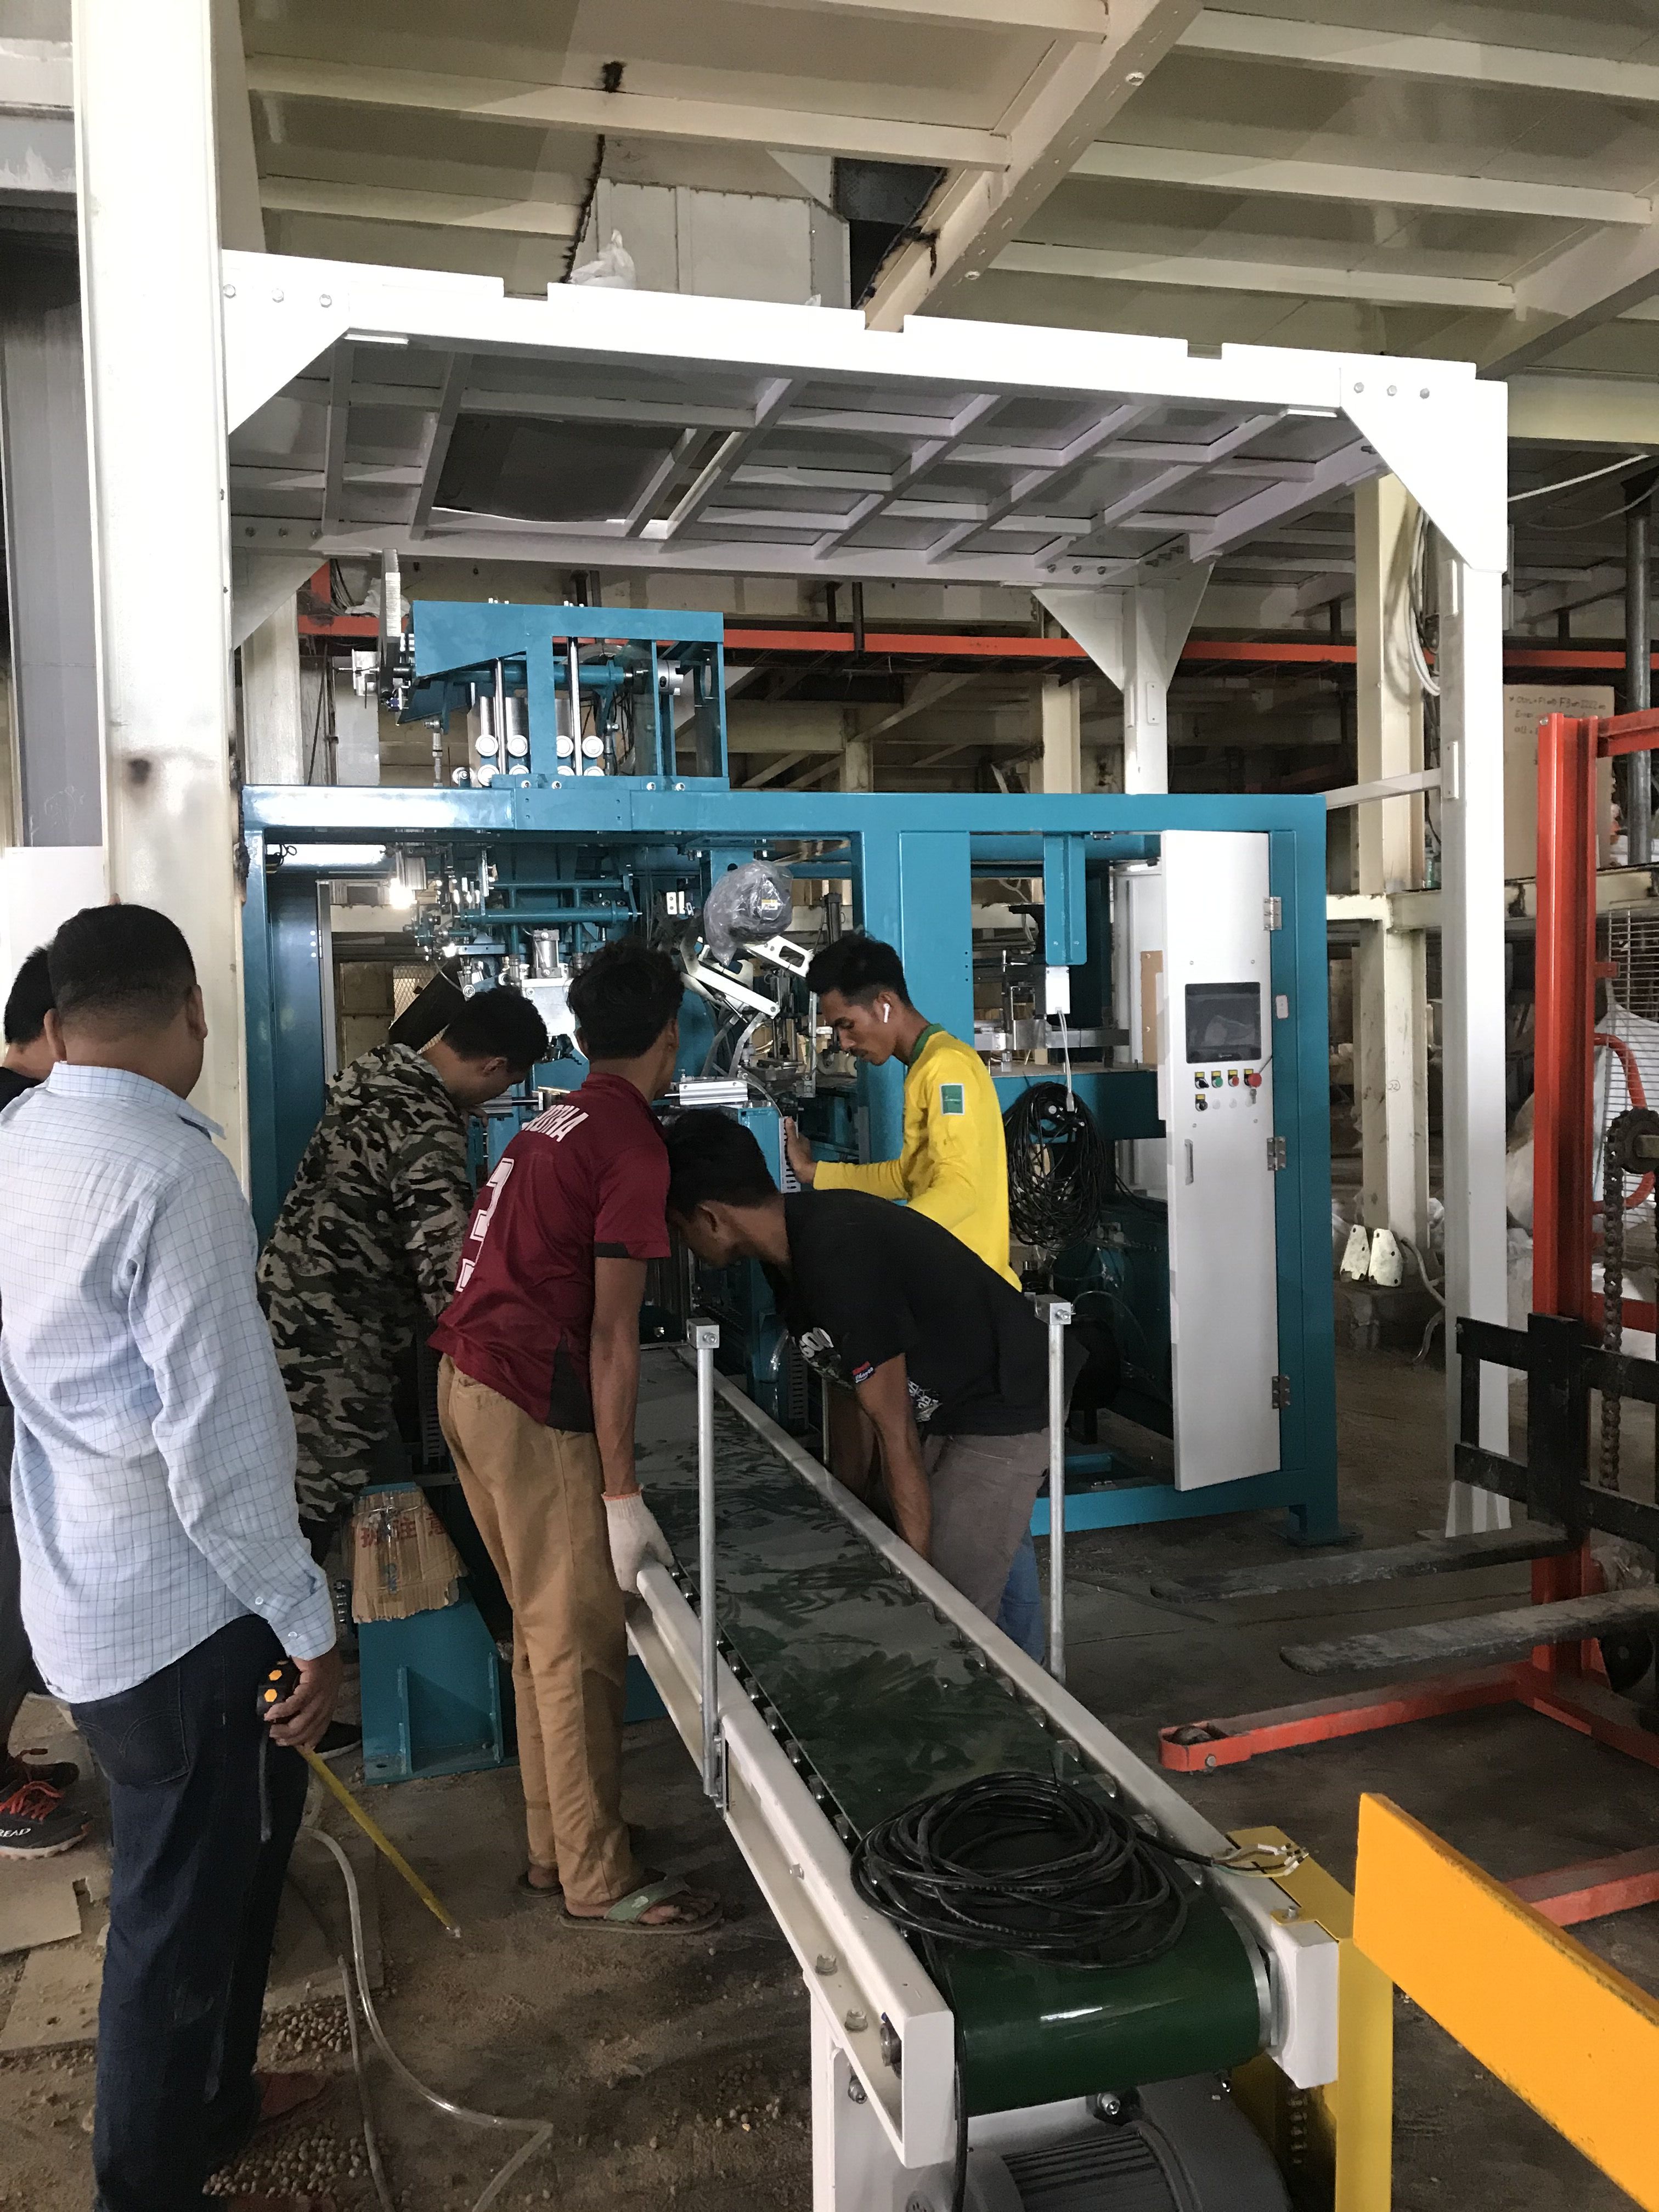 automatic packaging equipment manufacturer, Fully Automatic Packing Palletizing Line, Fully Automatic Packing & Palletizing Line